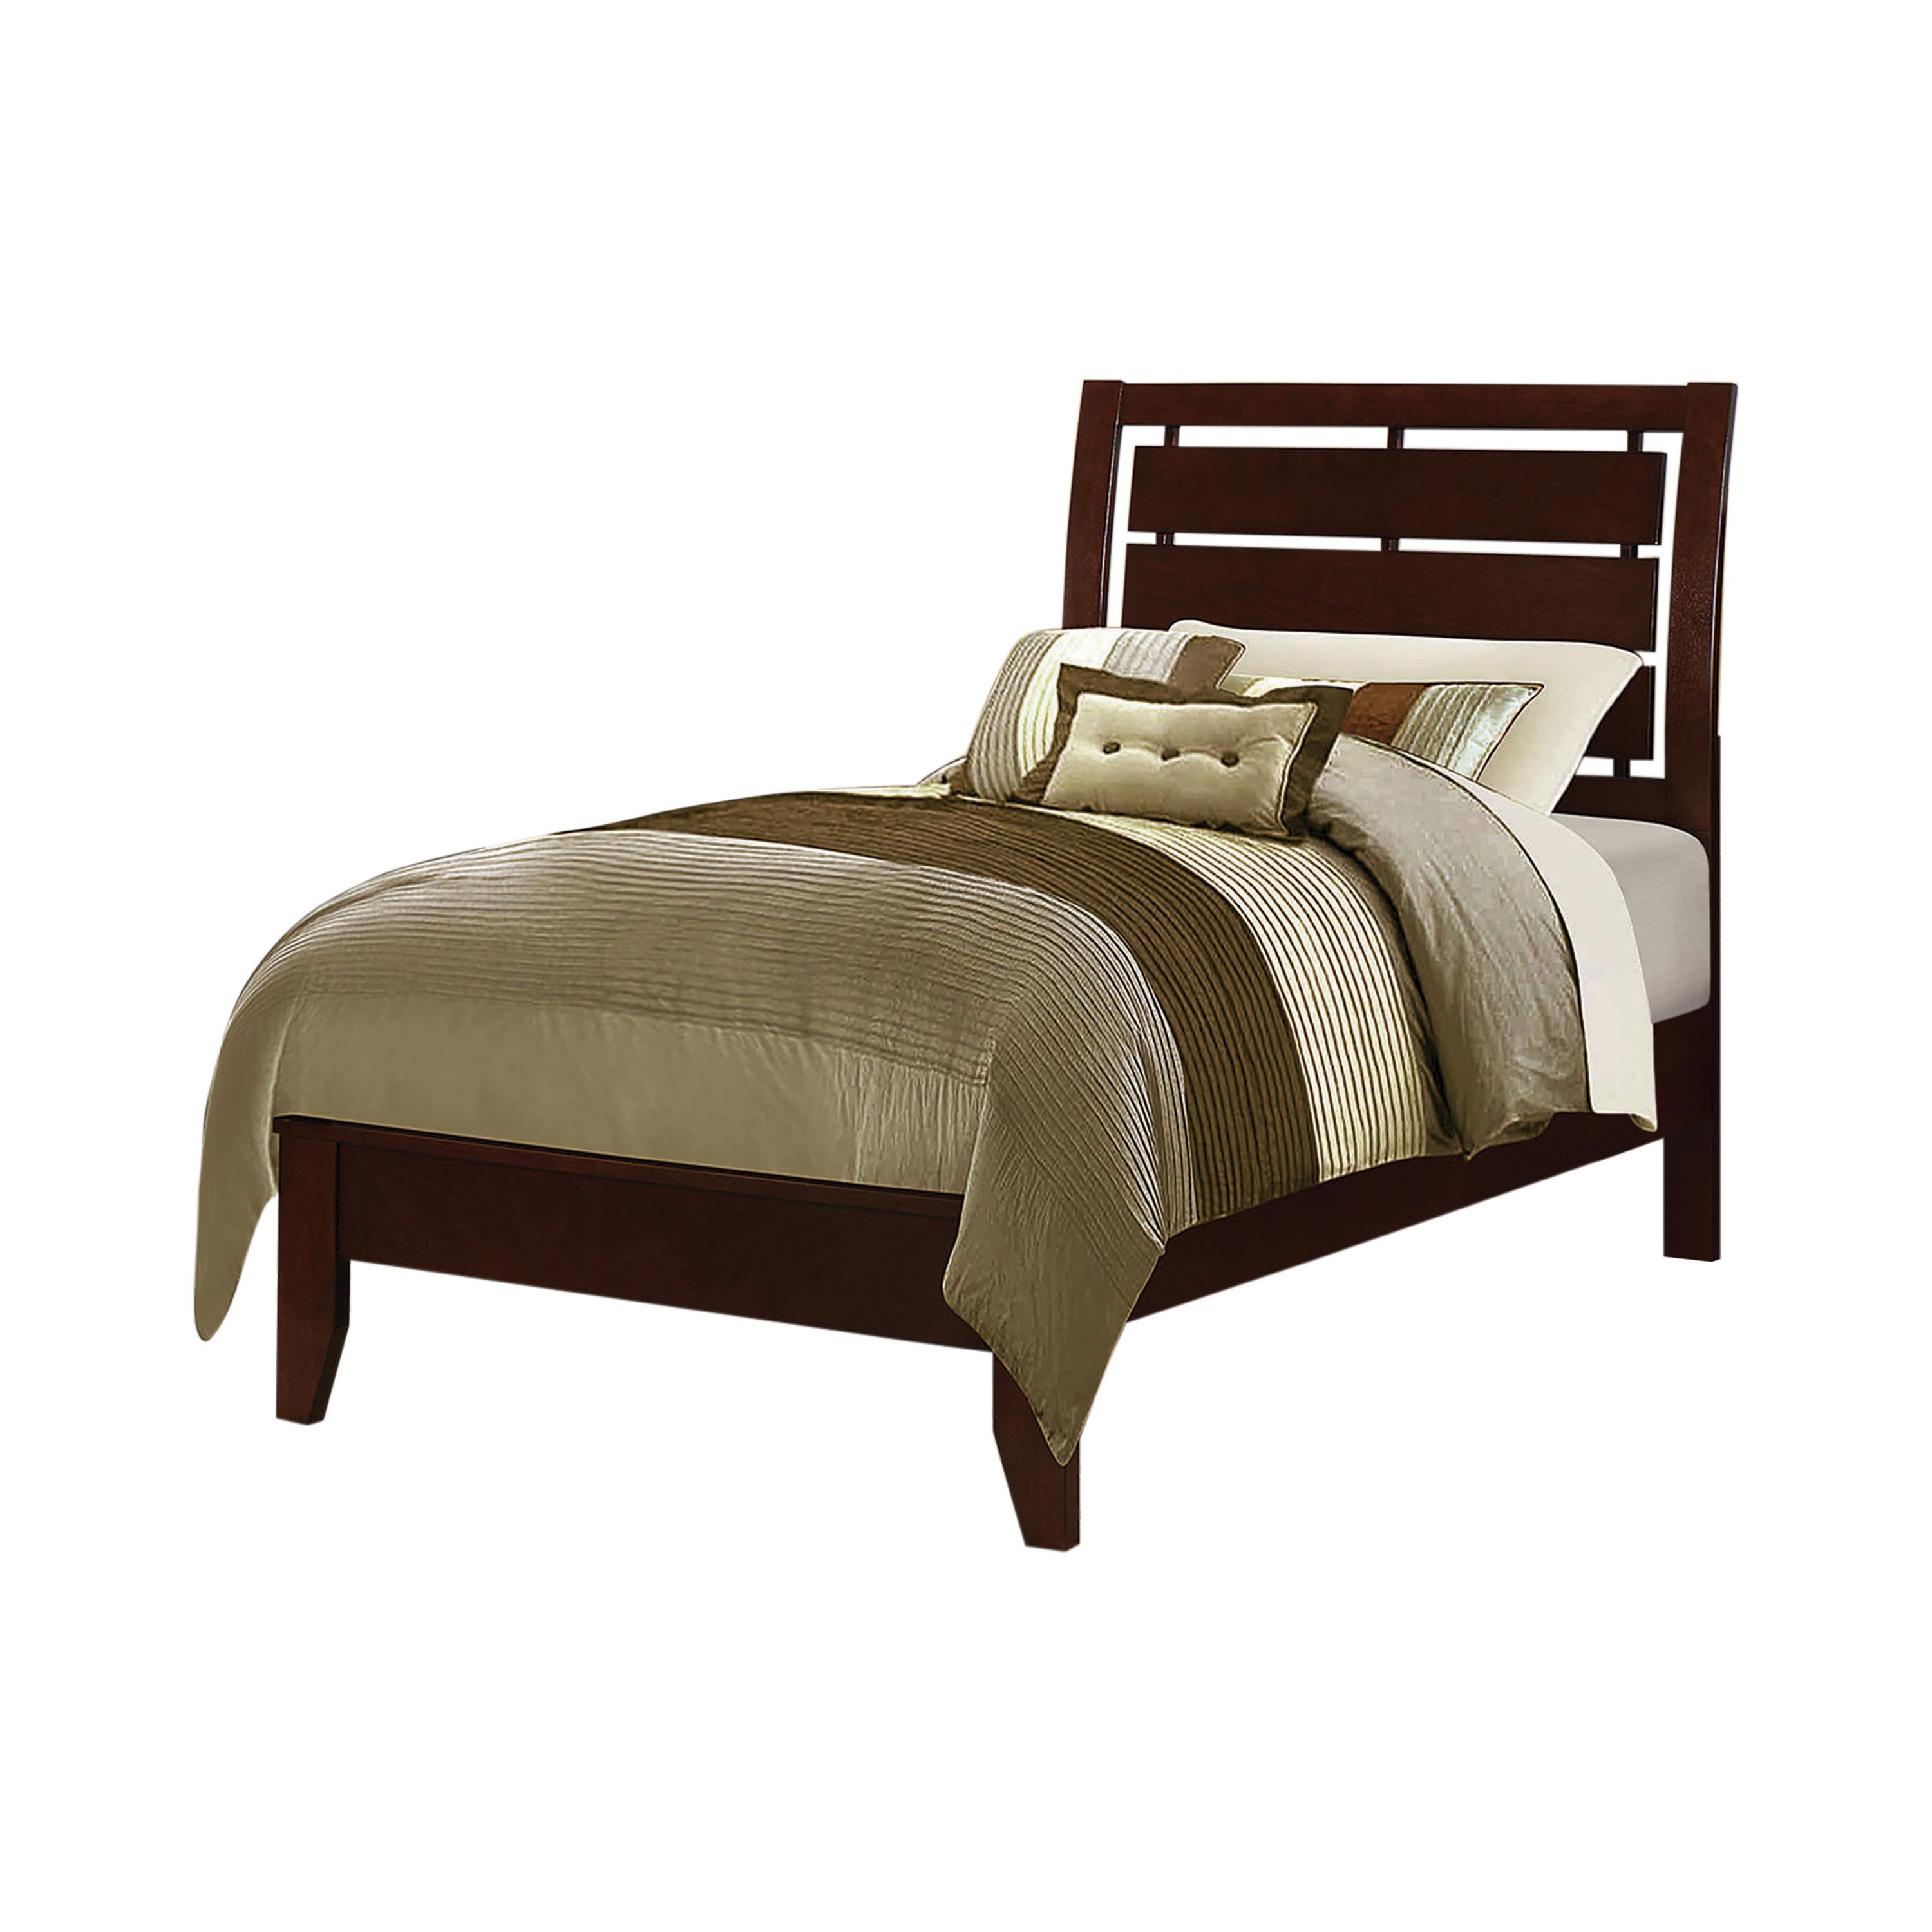 Transitional Bed 201971T Serenity 201971T in Merlot 